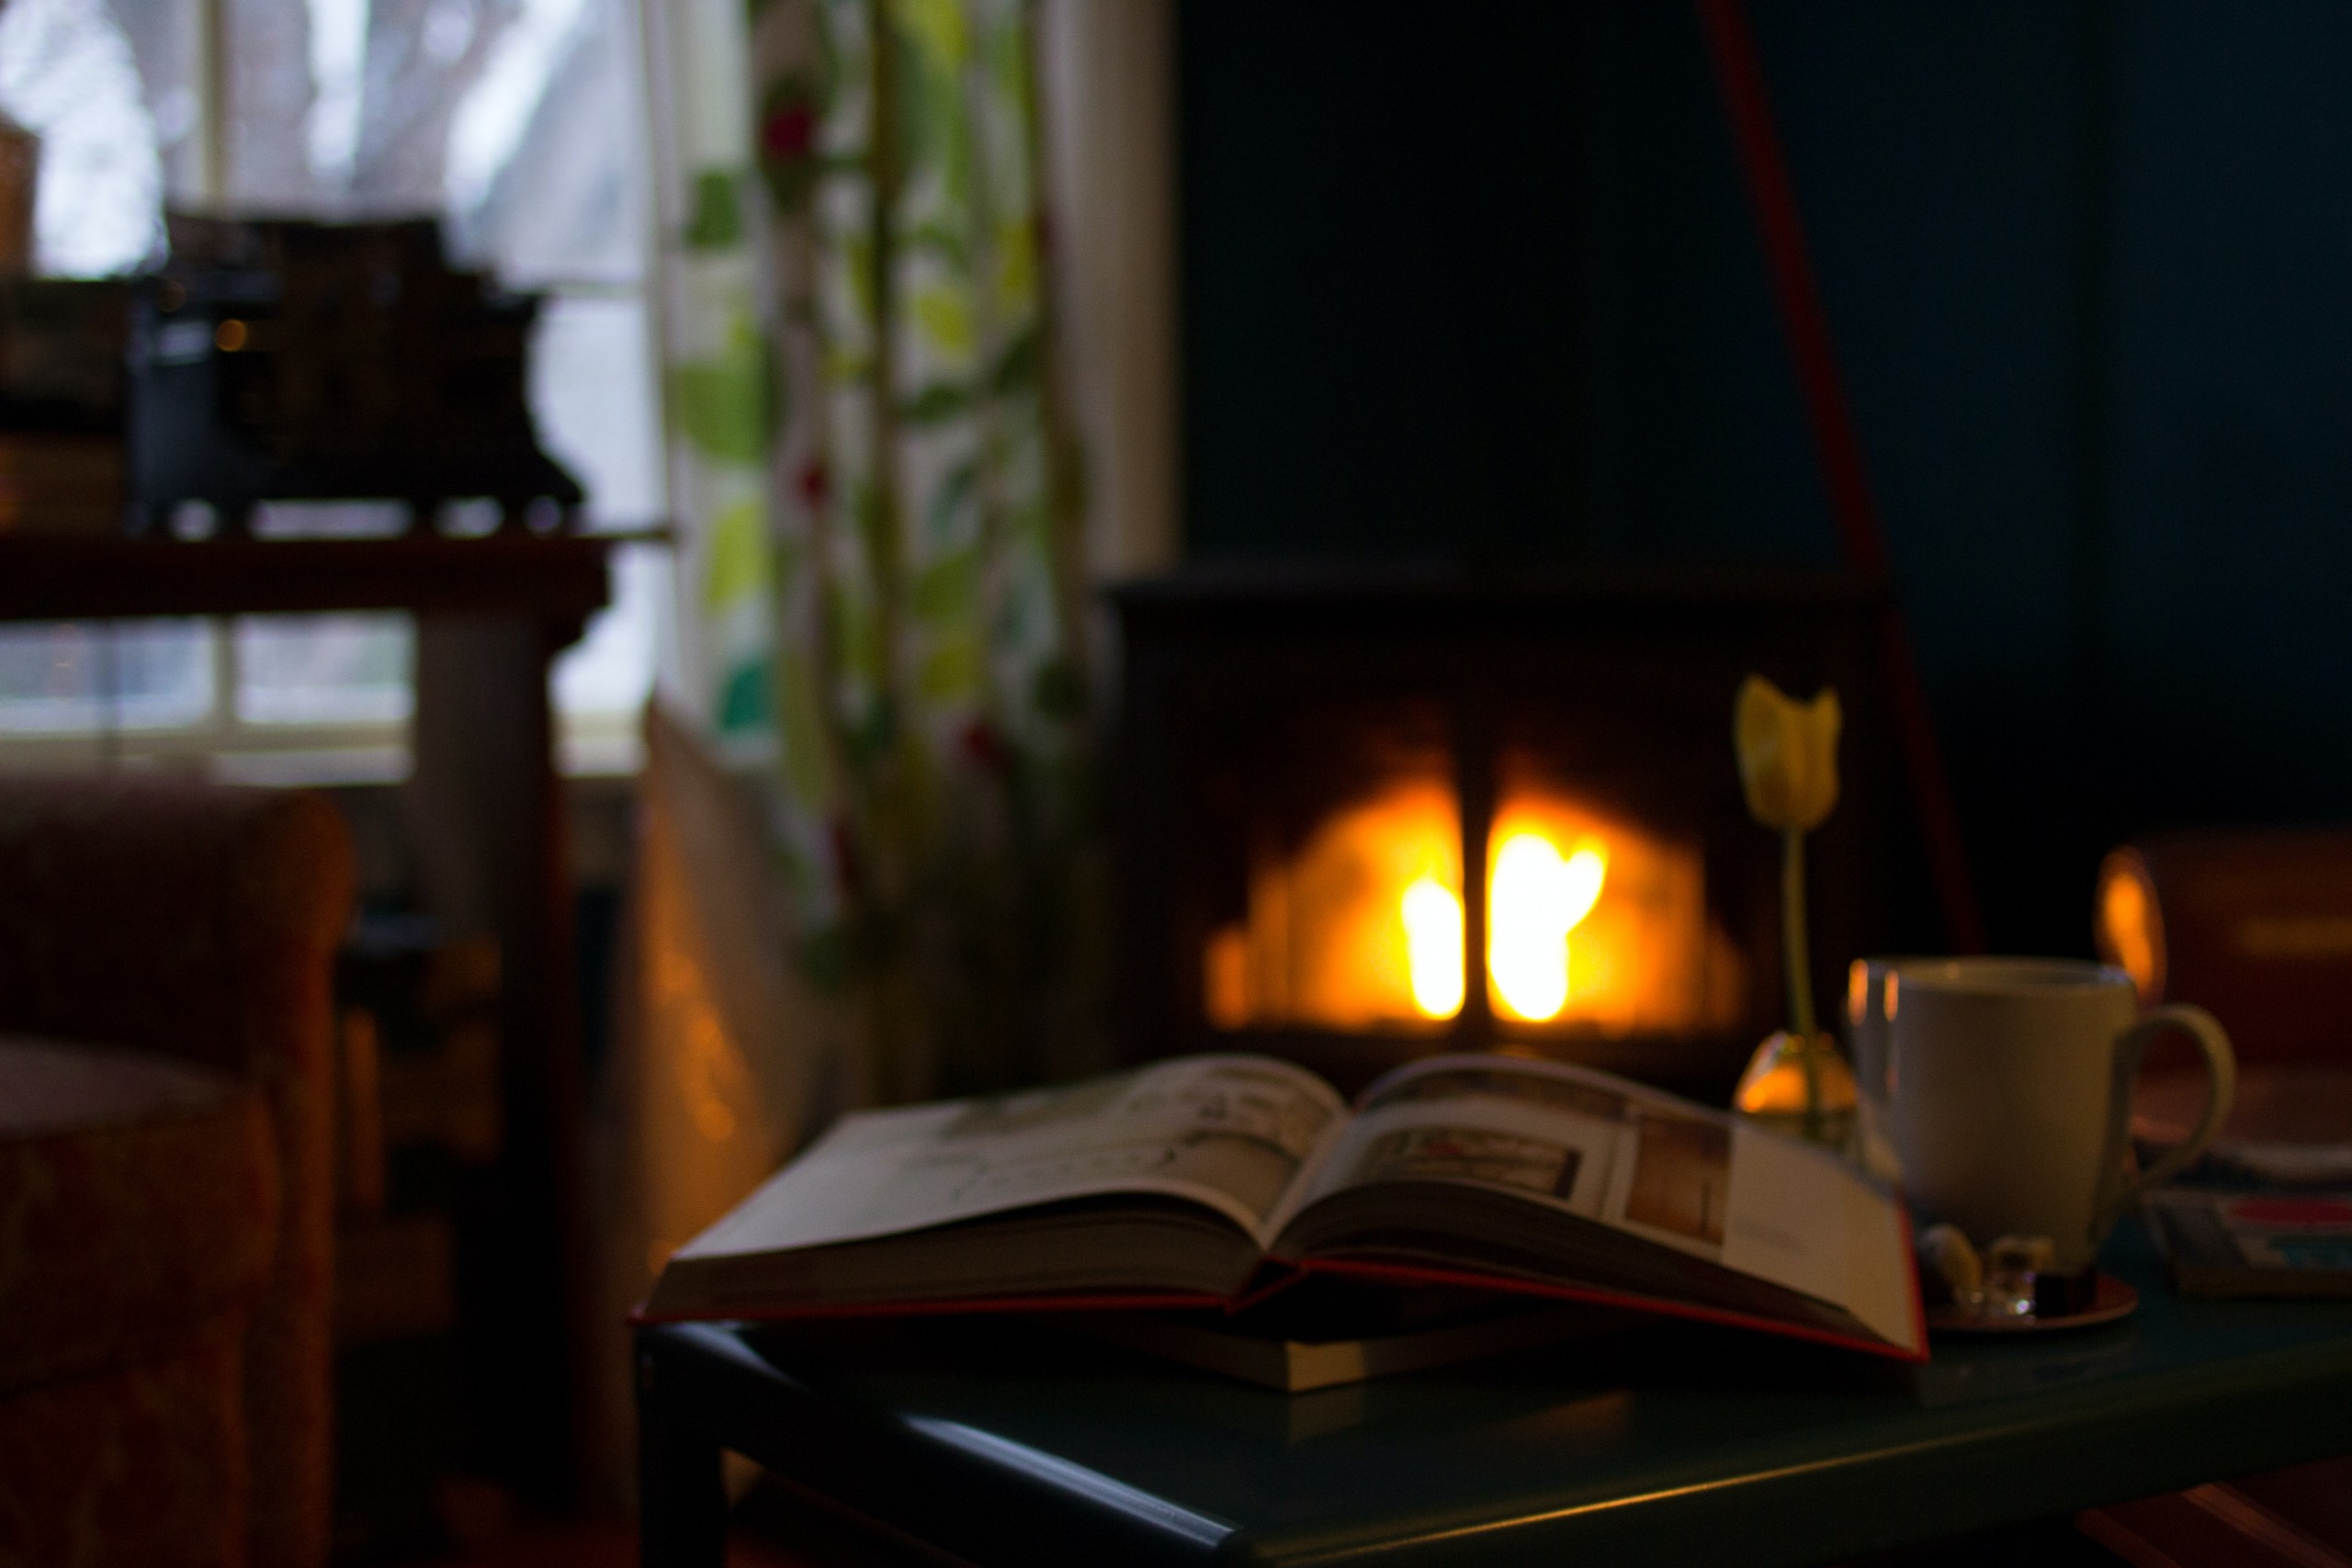 How To Make Your Home Cozy This Winter